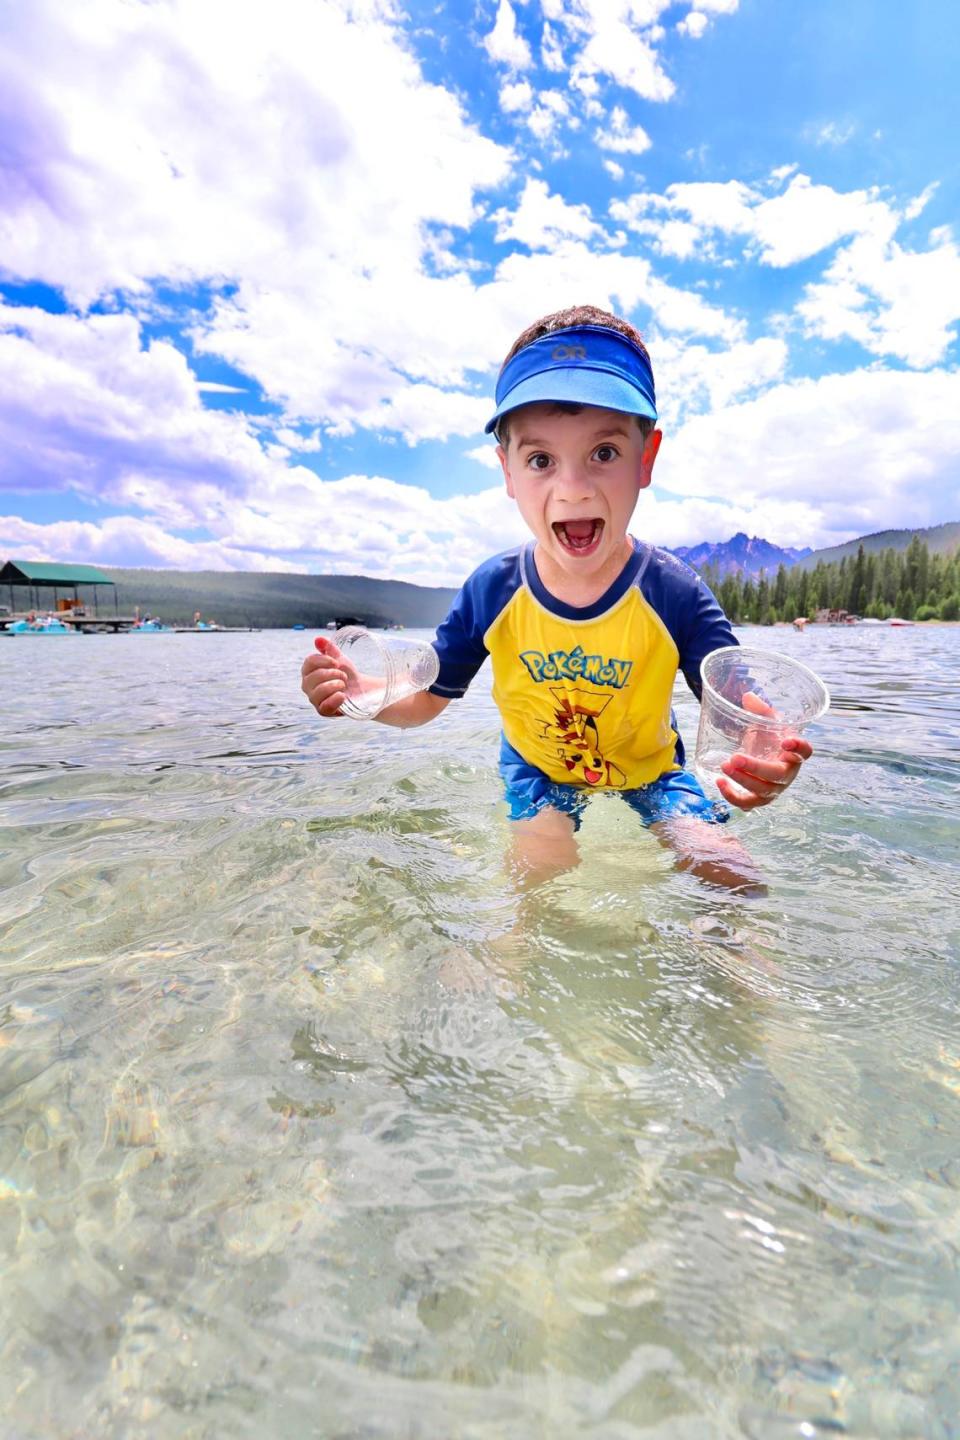 “SNRA is pure joy,” Jeff Walker said while submitting this photo from Redfish Lake, of his 7-year-old son Andrew.